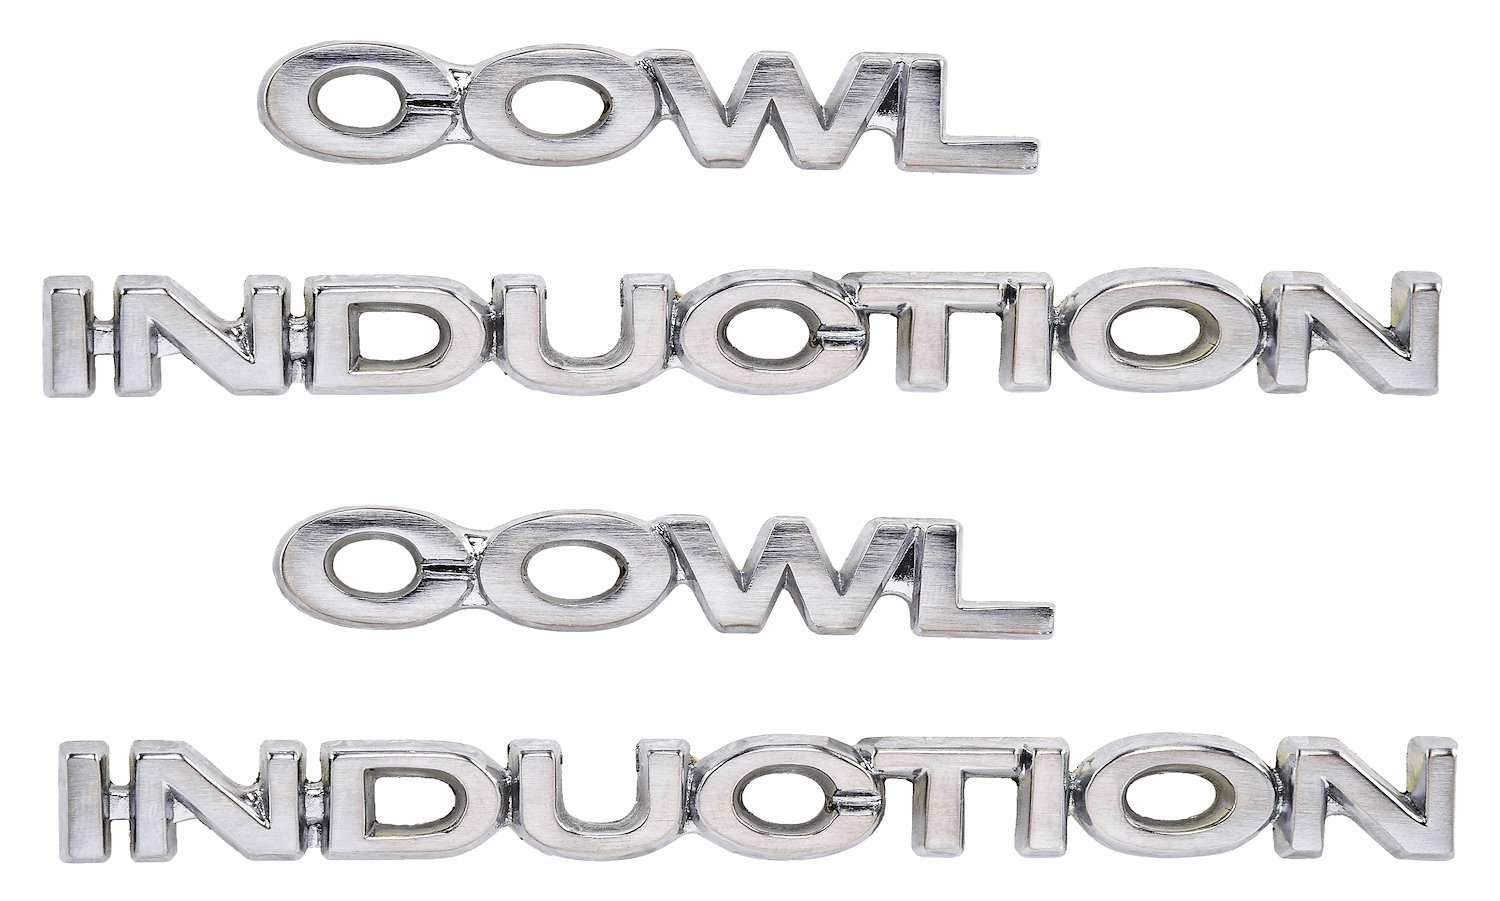 Cowl Induction Hood Emblems for 1970-1972 Chevrolet Chevelle, El Camino SS [Set of 2]